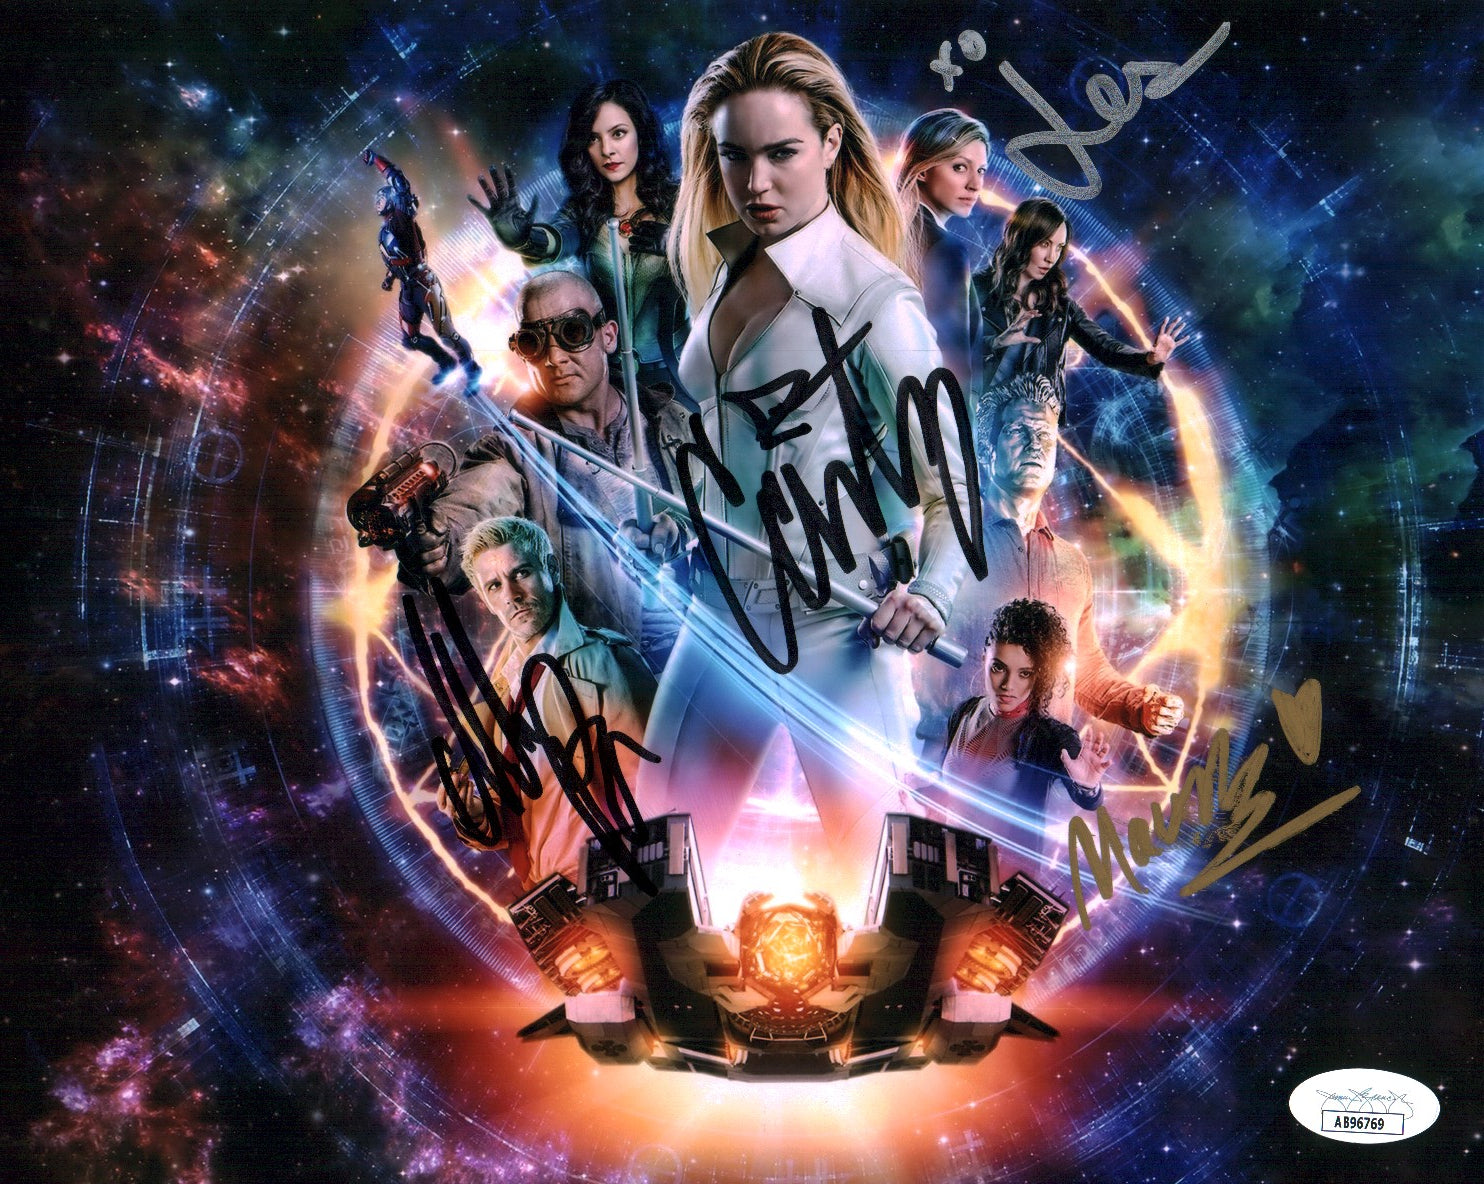 DC Legends of Tomorrow 8x10 Photo Signed Autograph Ford Routh Richardson-Sellers Ryan Macallan Lotz JSA Certified COA Auto